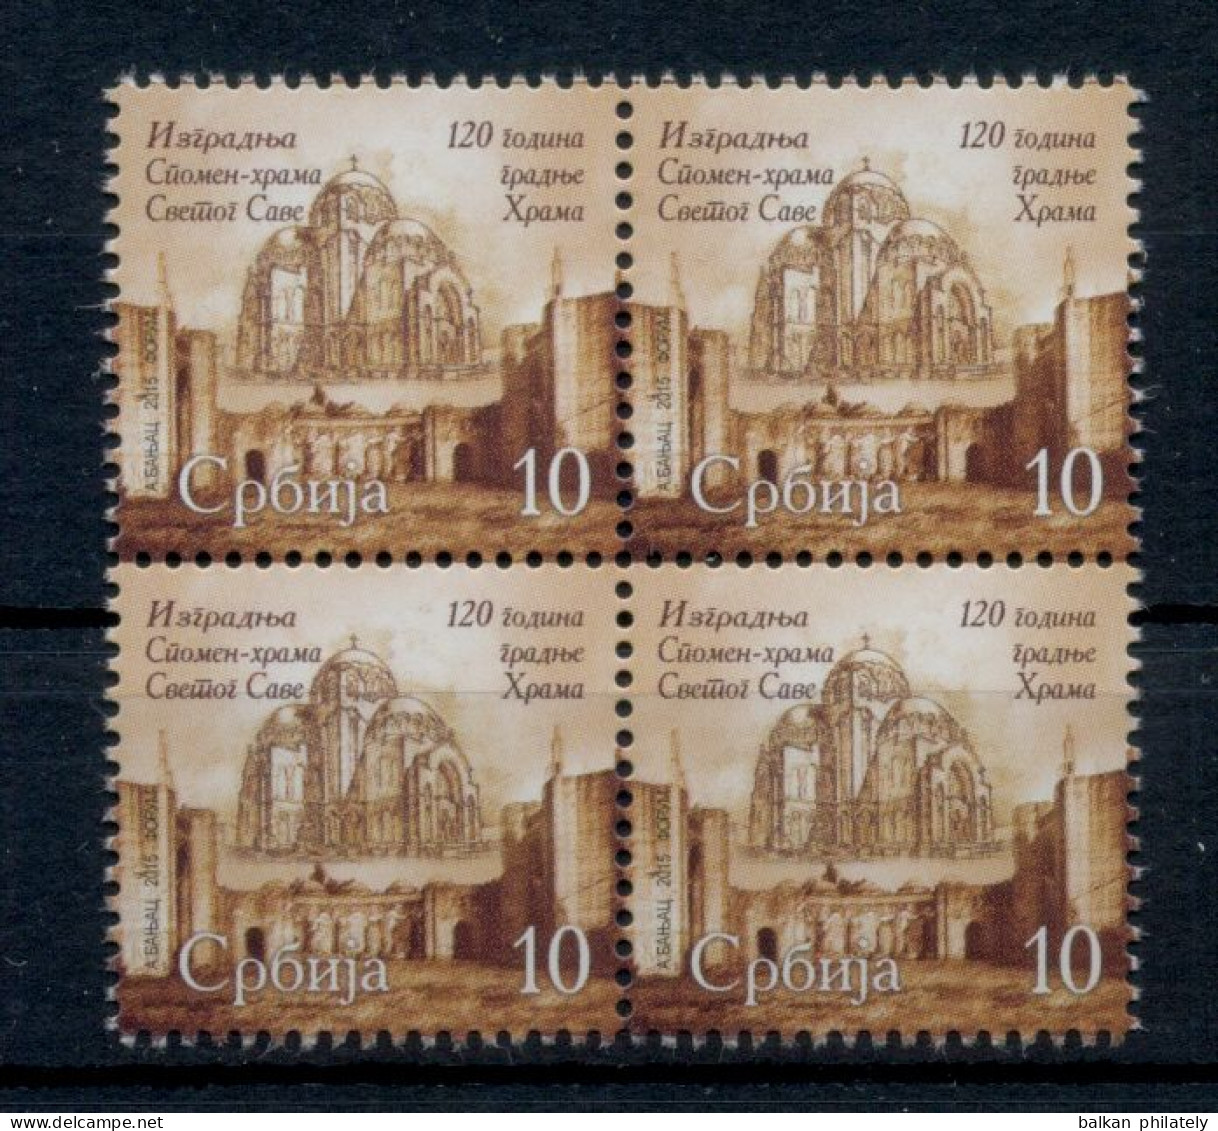 Serbia 2015 120 Years Of Construction The Temple Of Saint Sava Religions Christianity Church Tax Charity Surcharge MNH - Serbie